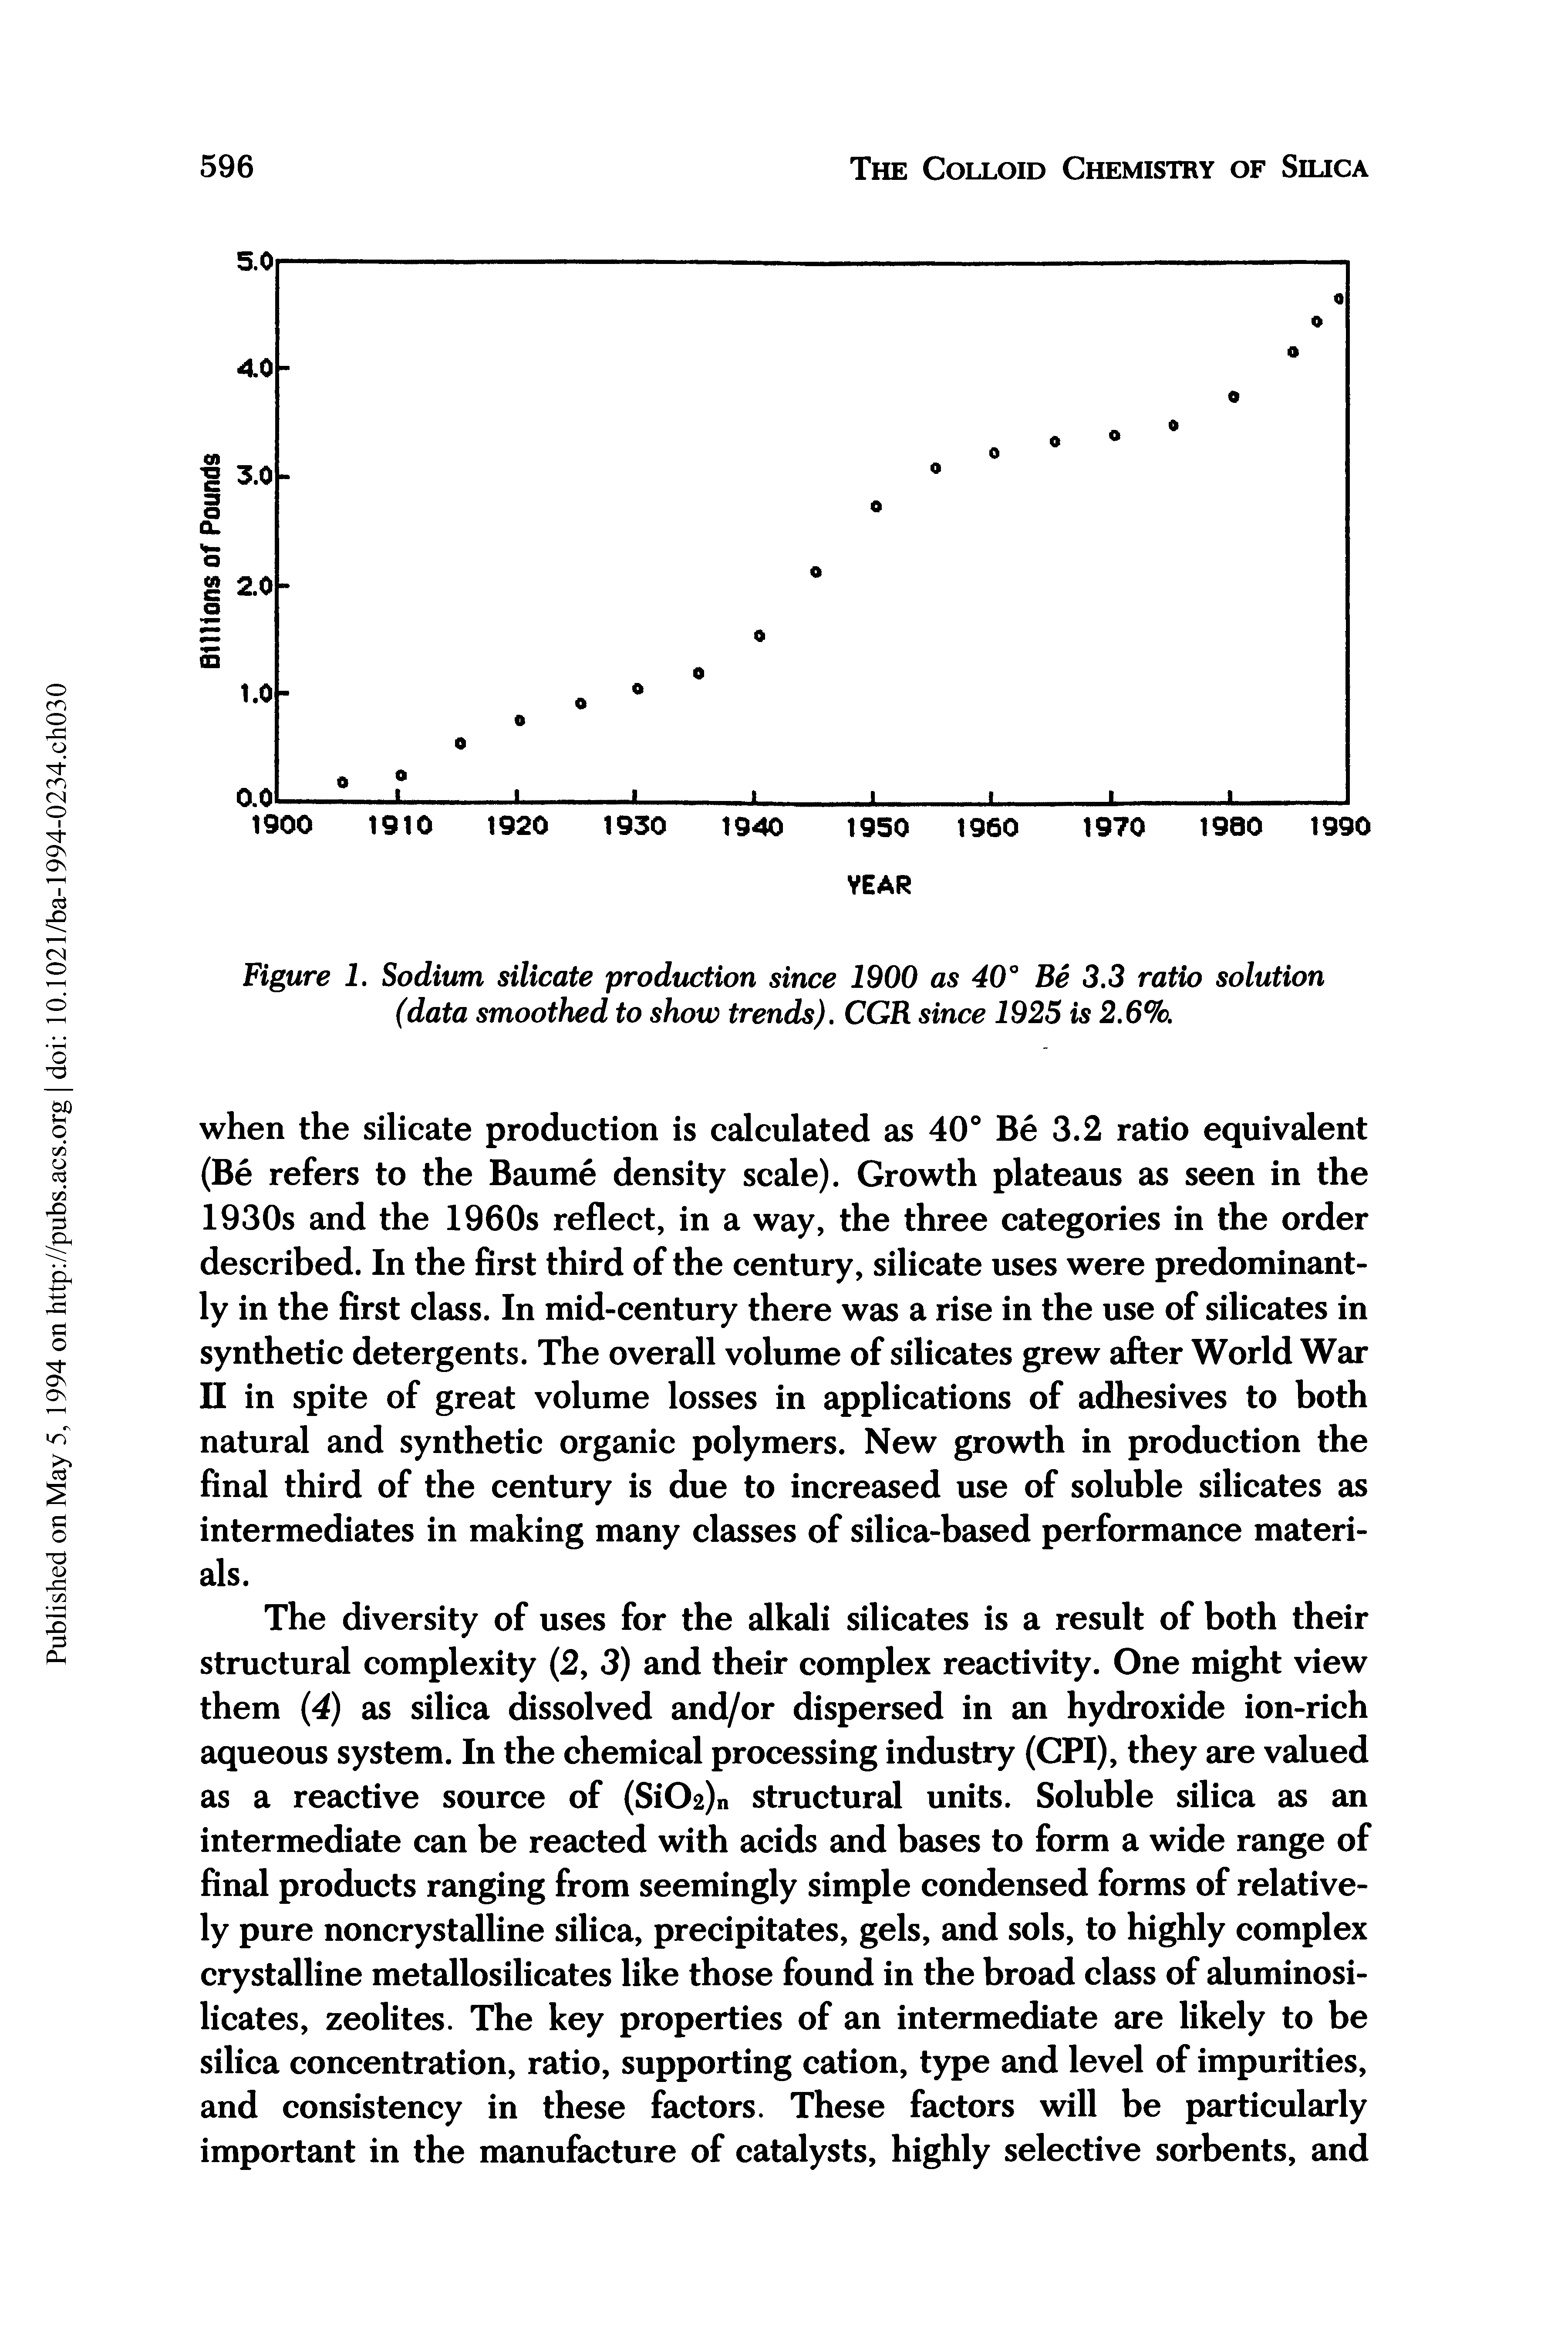 Figure 1. Sodium silicate production since 1900 as 40° Be 3.3 ratio solution (data smoothed to show trends). CGR since 1925 is 2.6%.